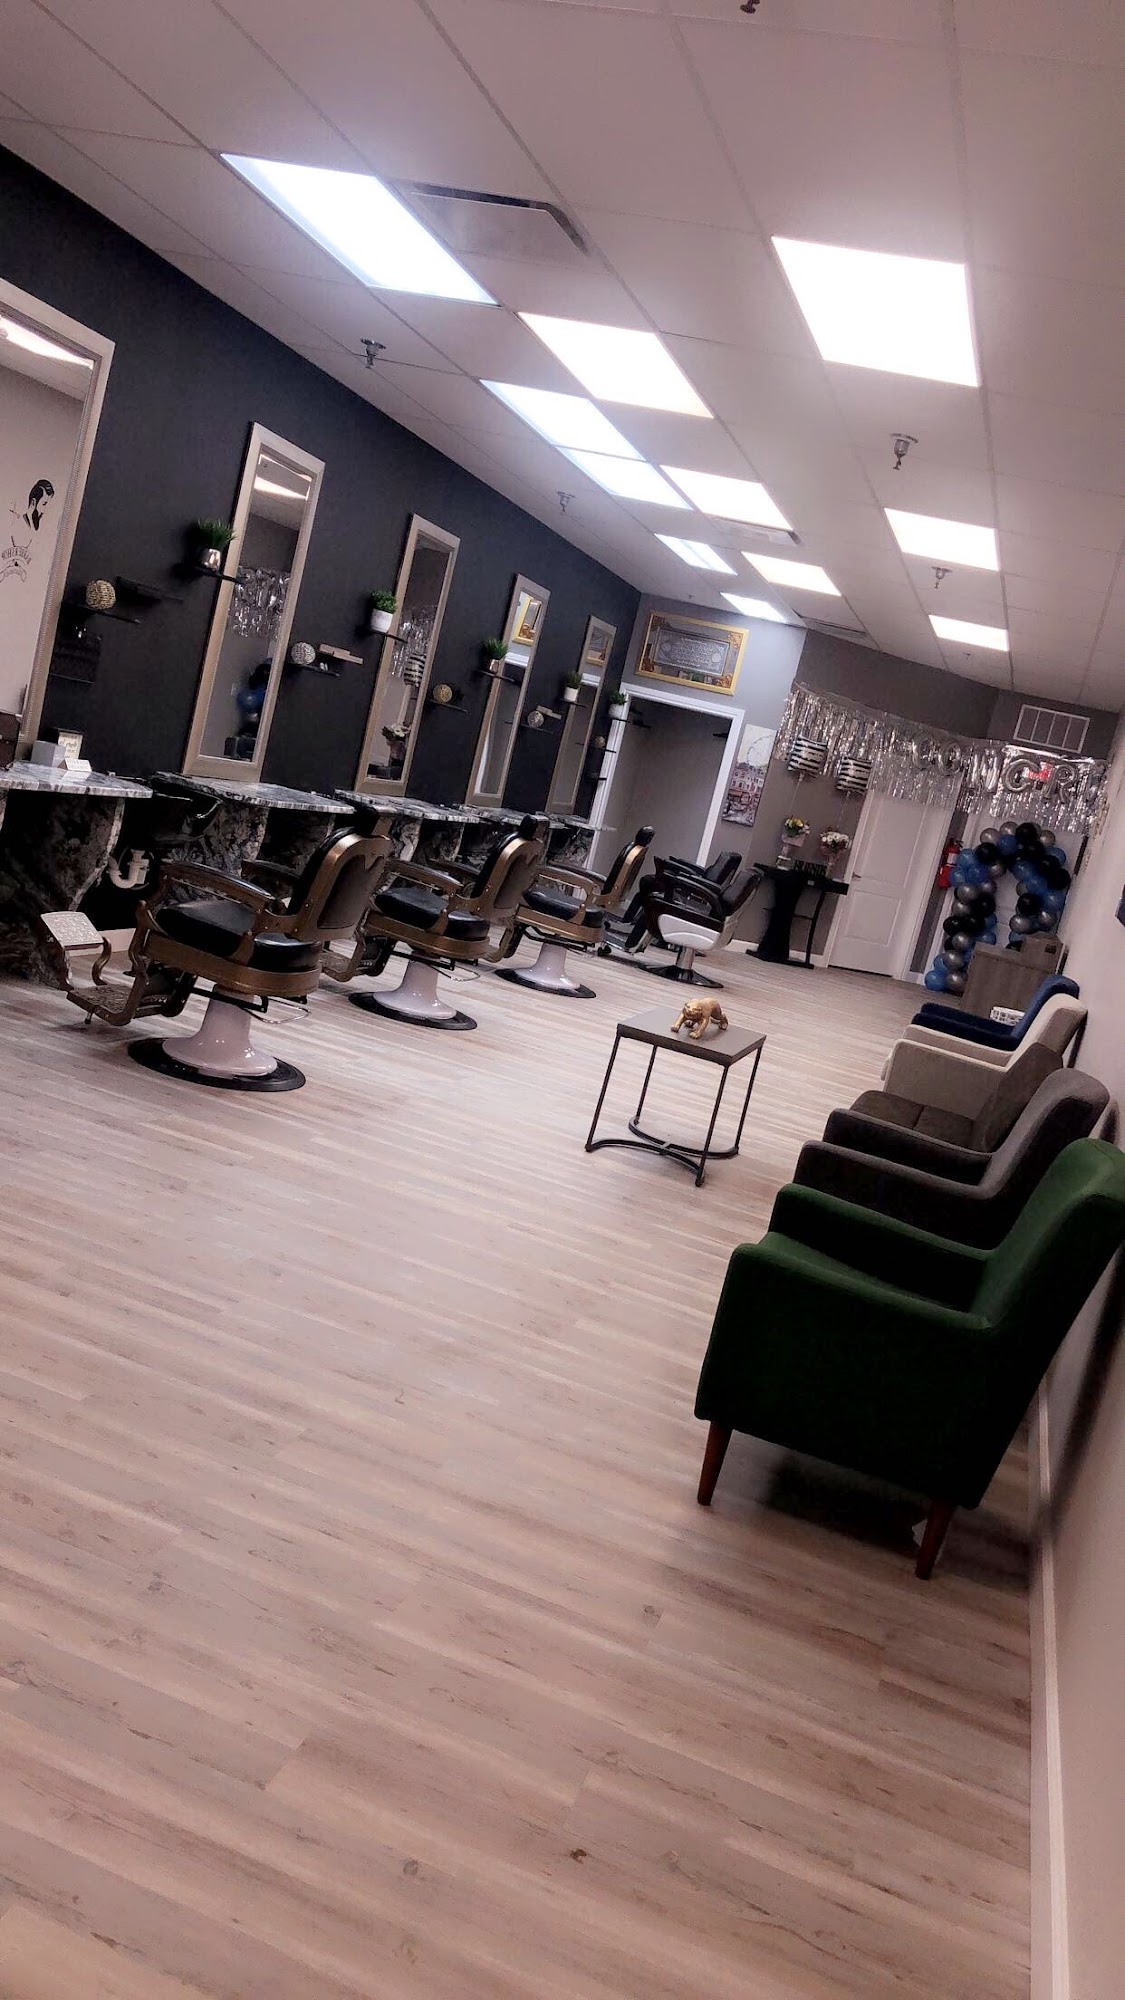 Billy's Top of the Line Barbershop & Salon